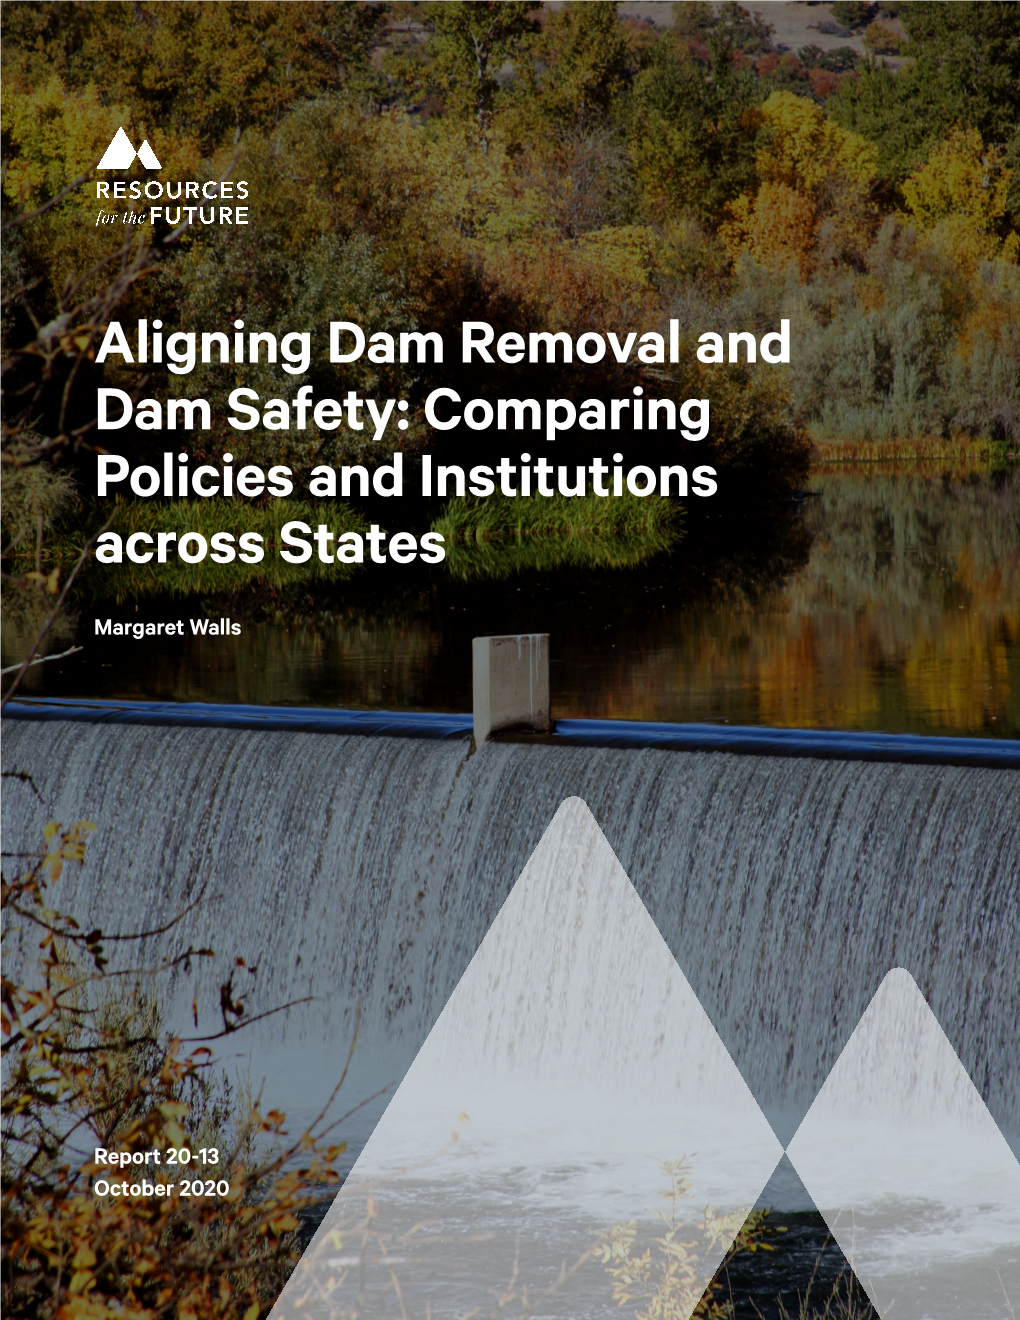 Aligning Dam Removal and Dam Safety: Comparing Policies and Institutions Across States